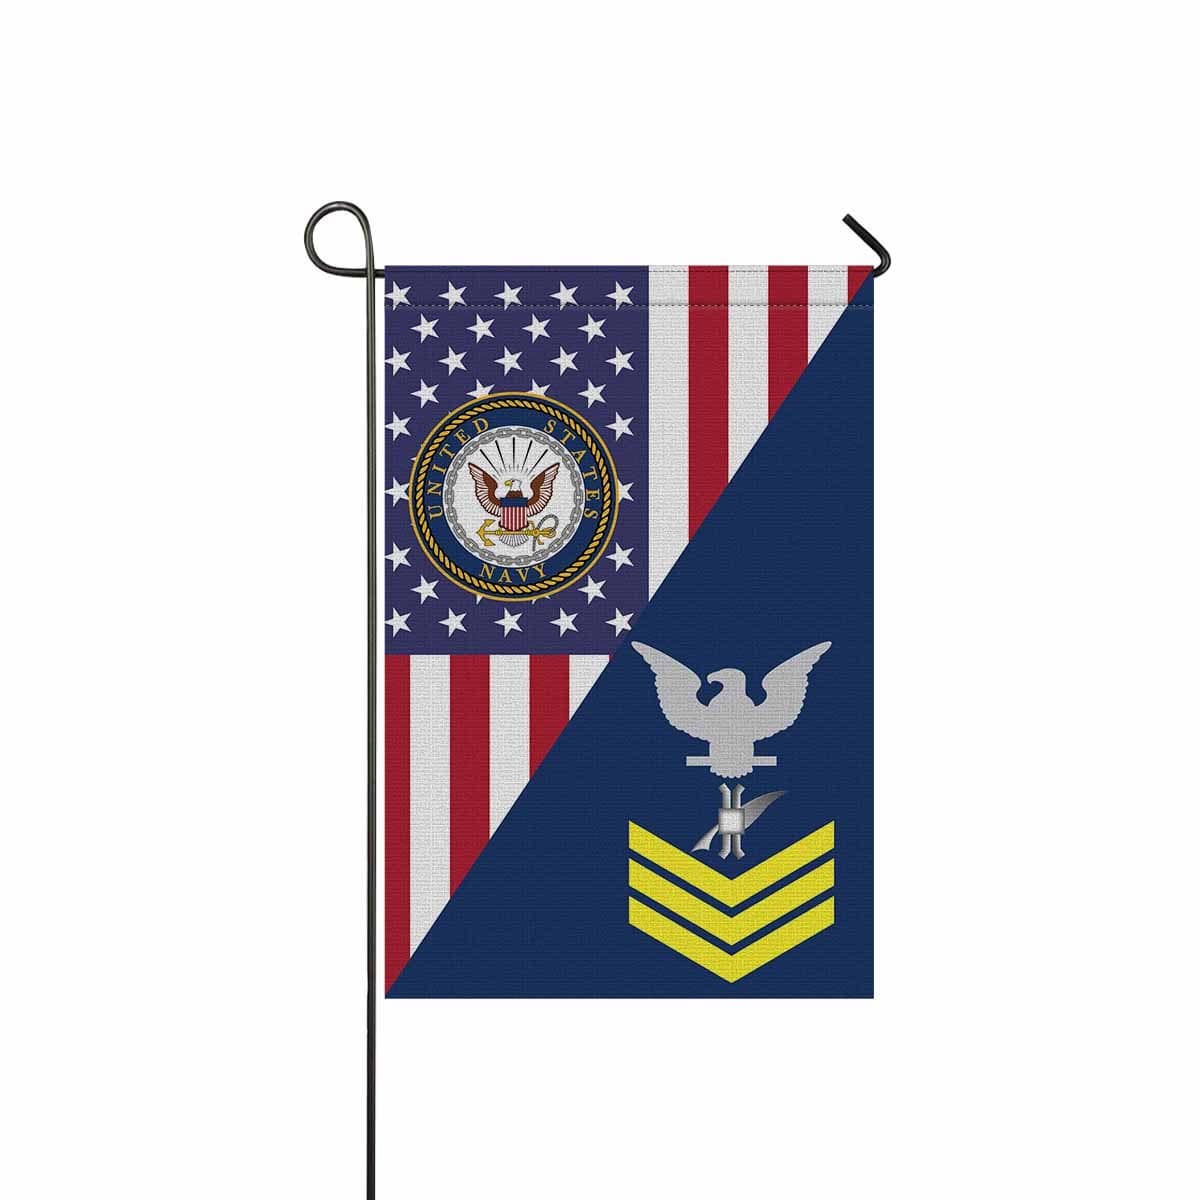 Navy Legalman Navy LN E-6 Gold Stripe Garden Flag/Yard Flag 12 inches x 18 inches Twin-Side Printing-GDFlag-Navy-Rating-Veterans Nation